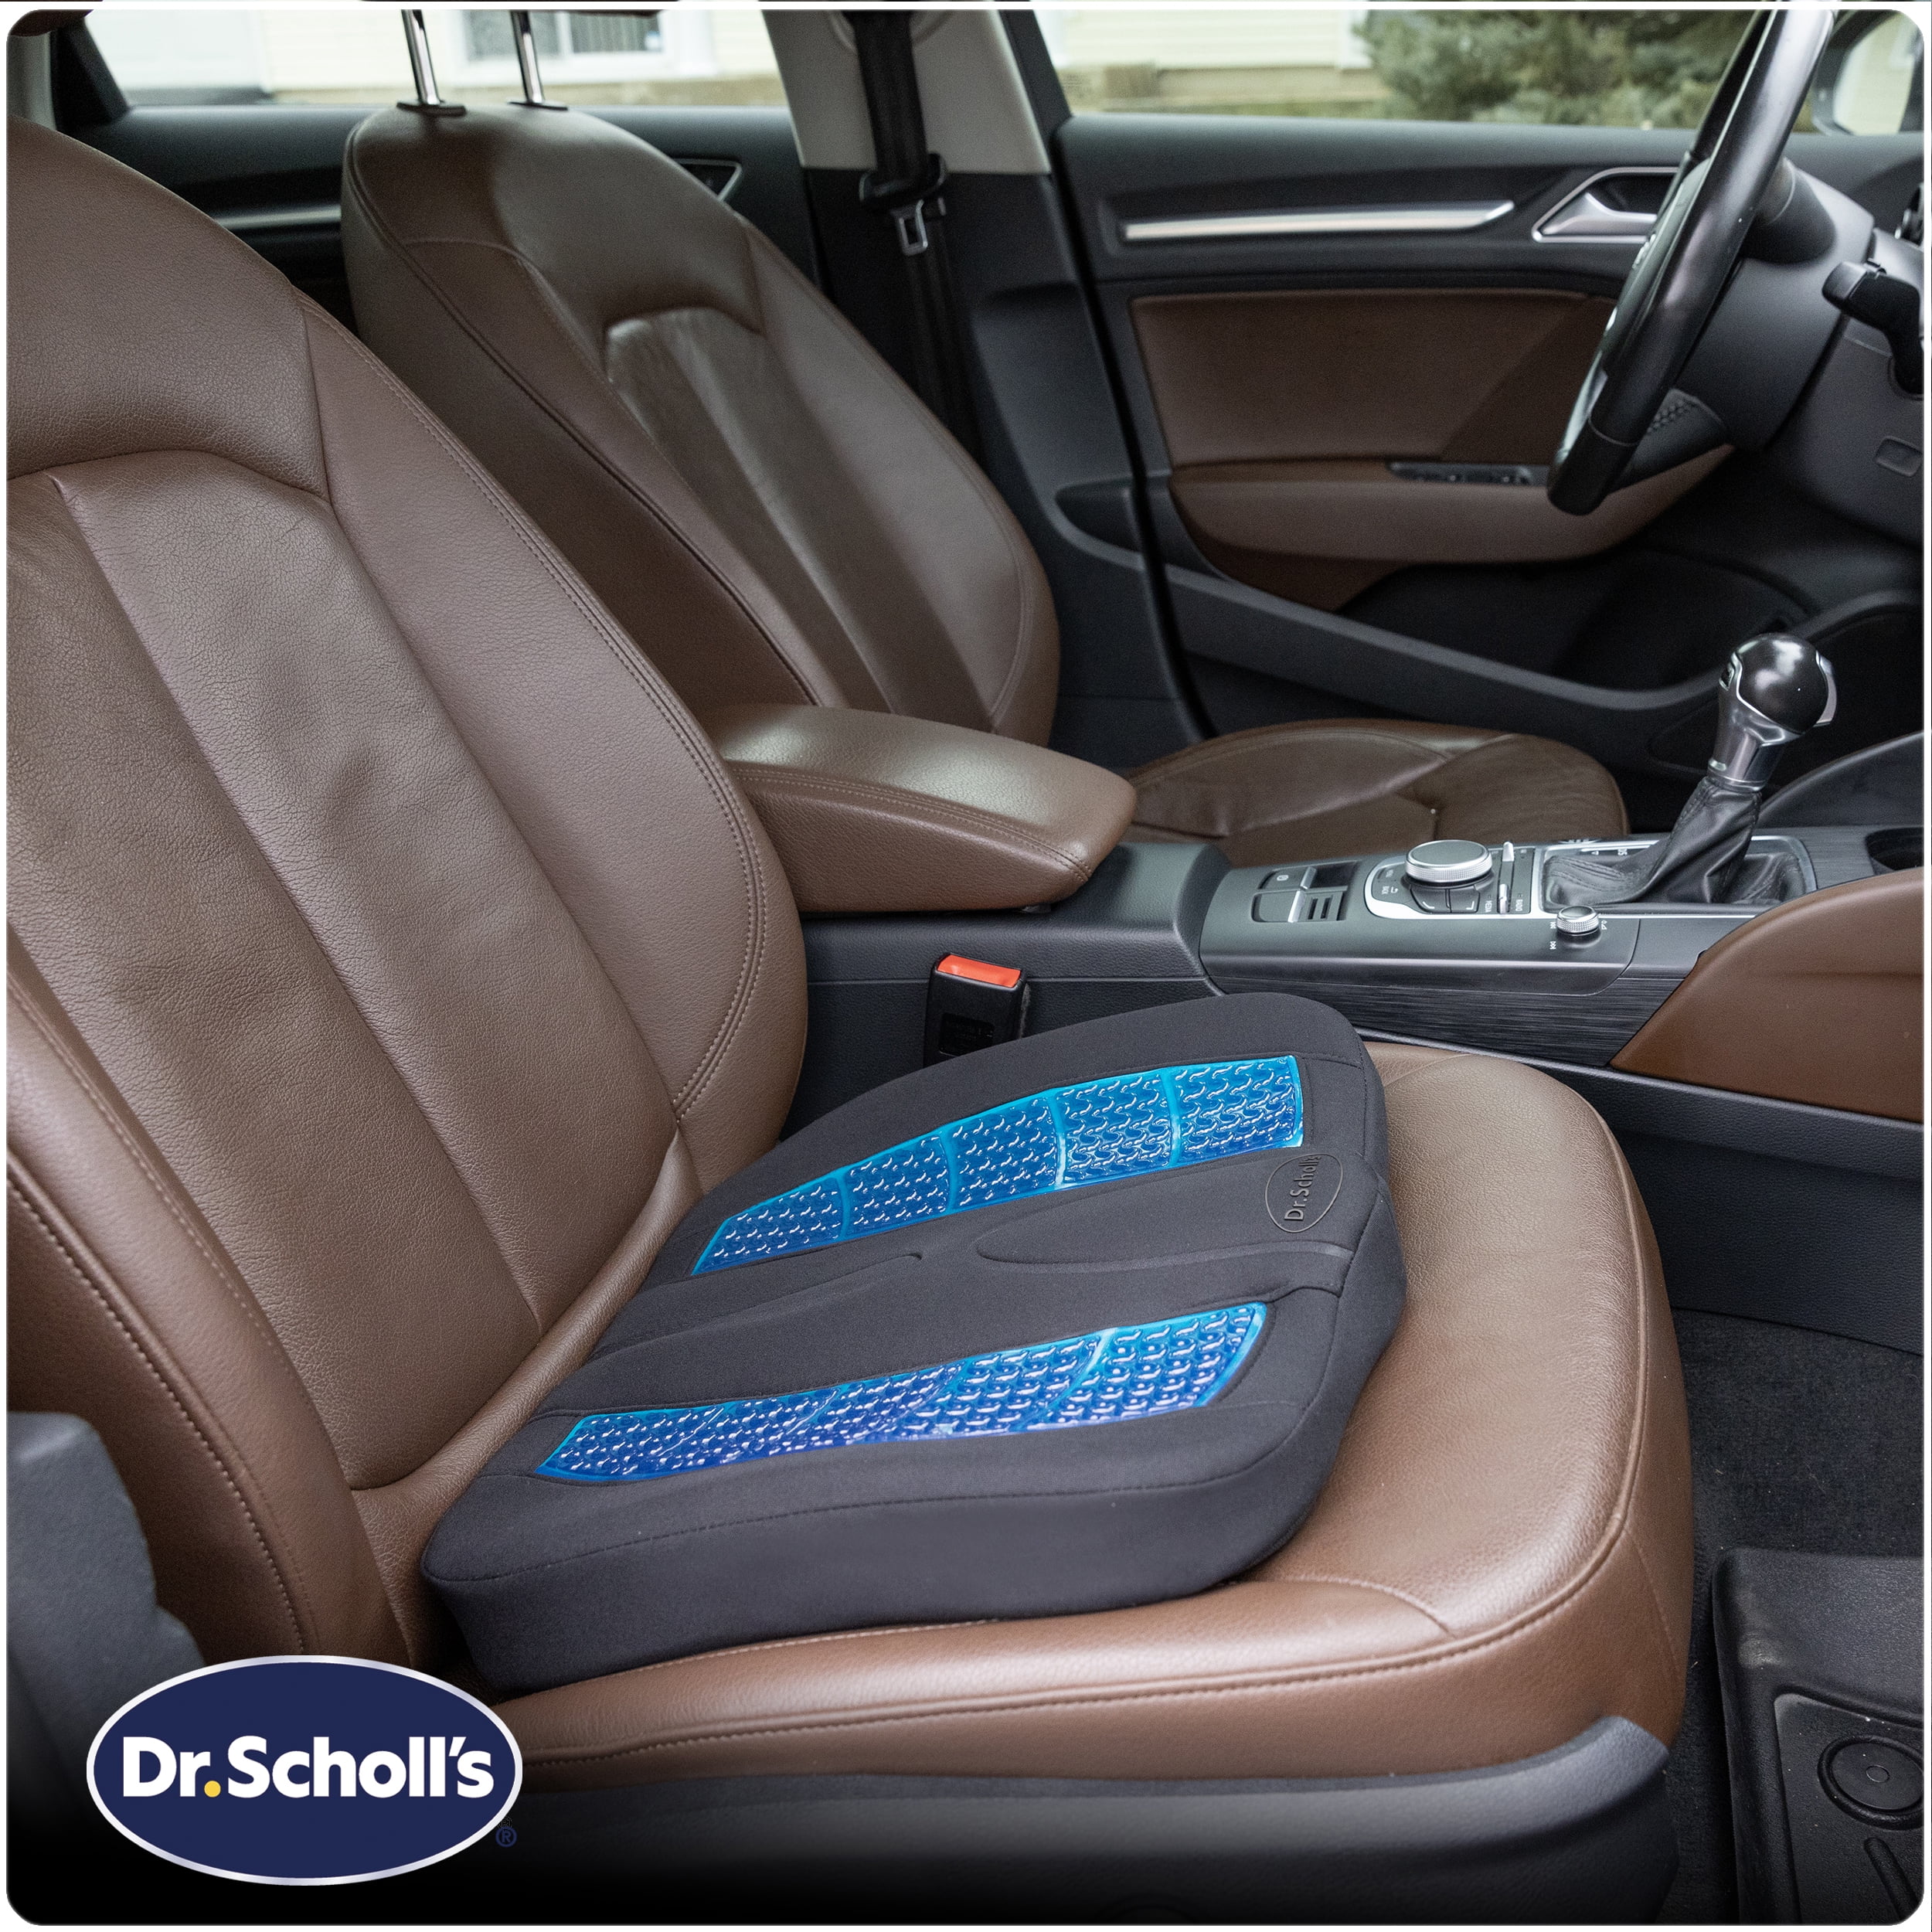 Custom Accessories Dr. Scholl's UltraCool Gel-Infused Posterior Seat Cushion for Car, Truck, SUV - Anti-Slip Backing and Memory Foam for Ergonomic Support and Back